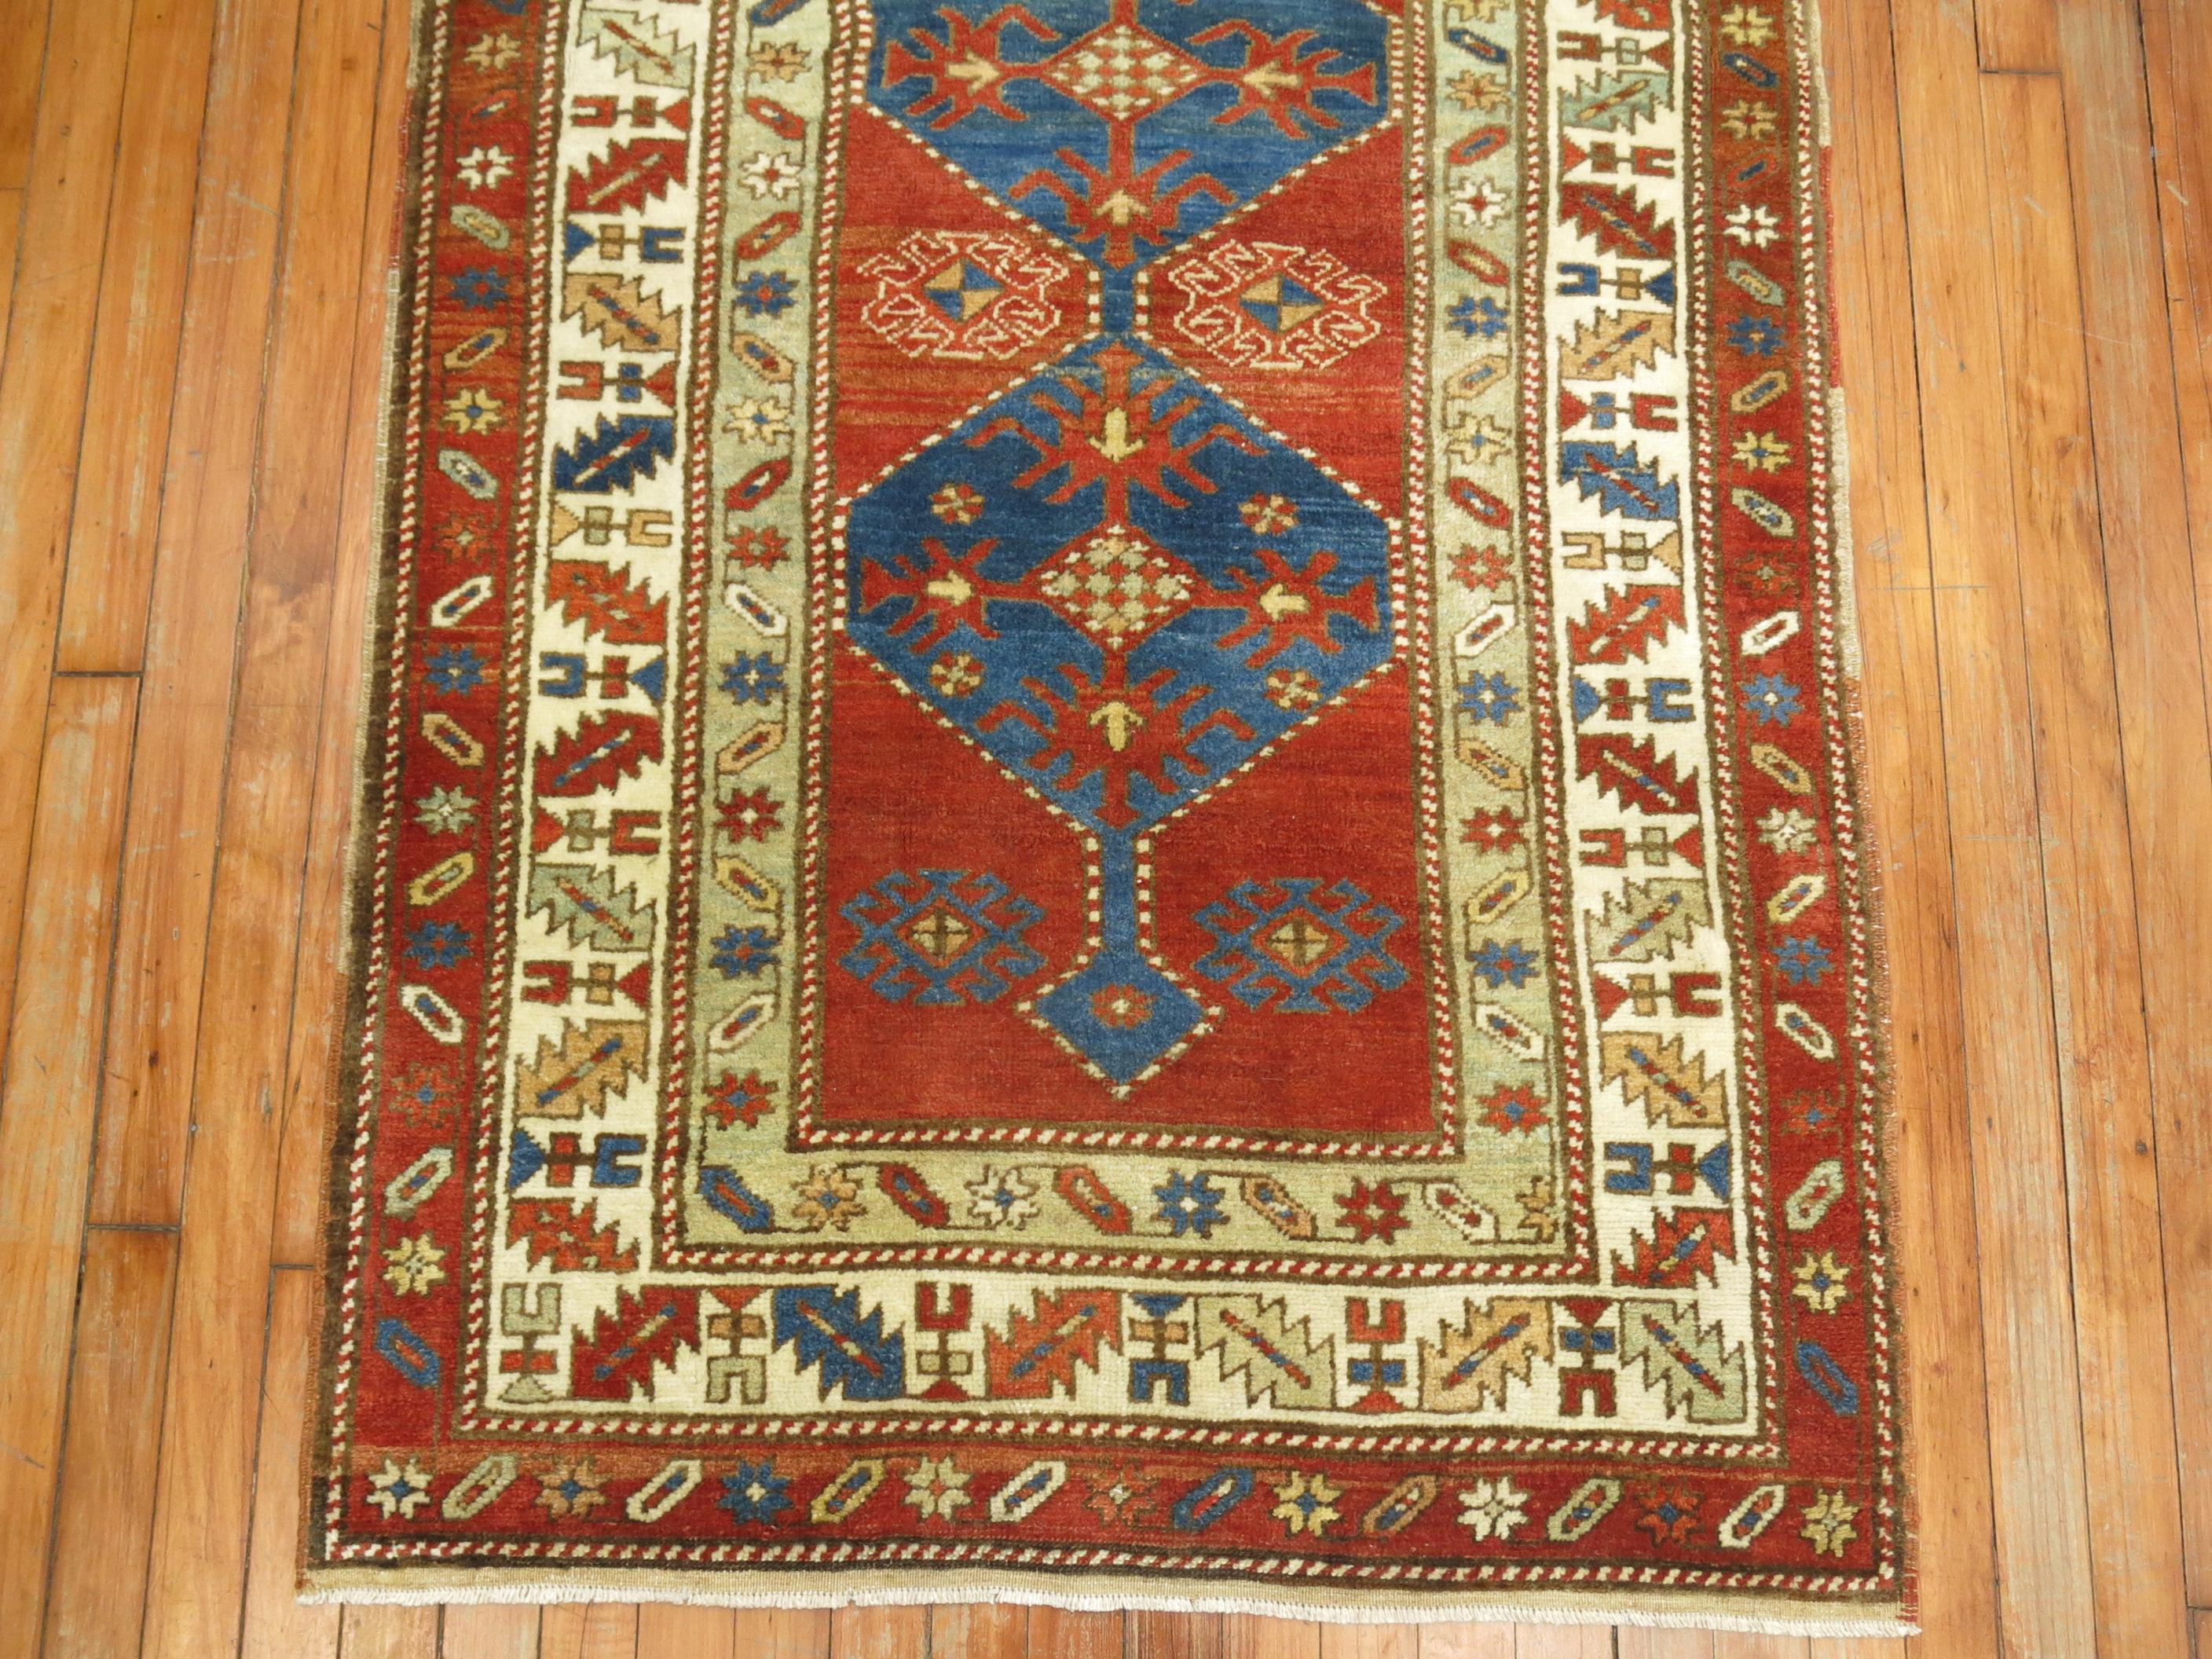 Geometric antique northwest Persian runner with a rusty brown field bodied by blue geometric medallions and a multi band border

Measures: 3'3” x 12'5”.